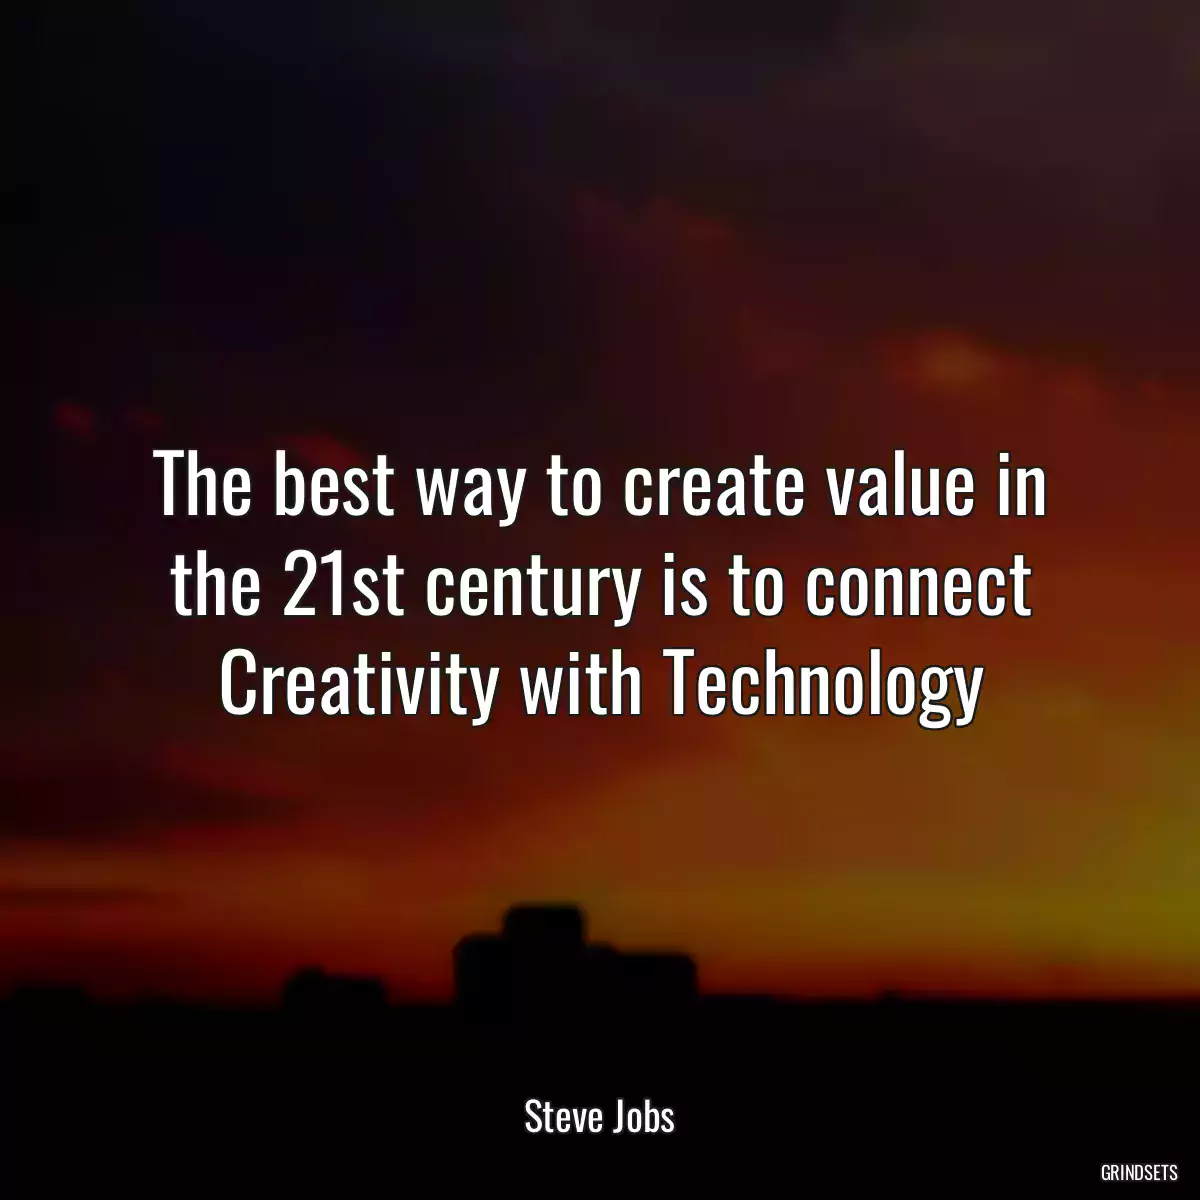 The best way to create value in the 21st century is to connect Creativity with Technology